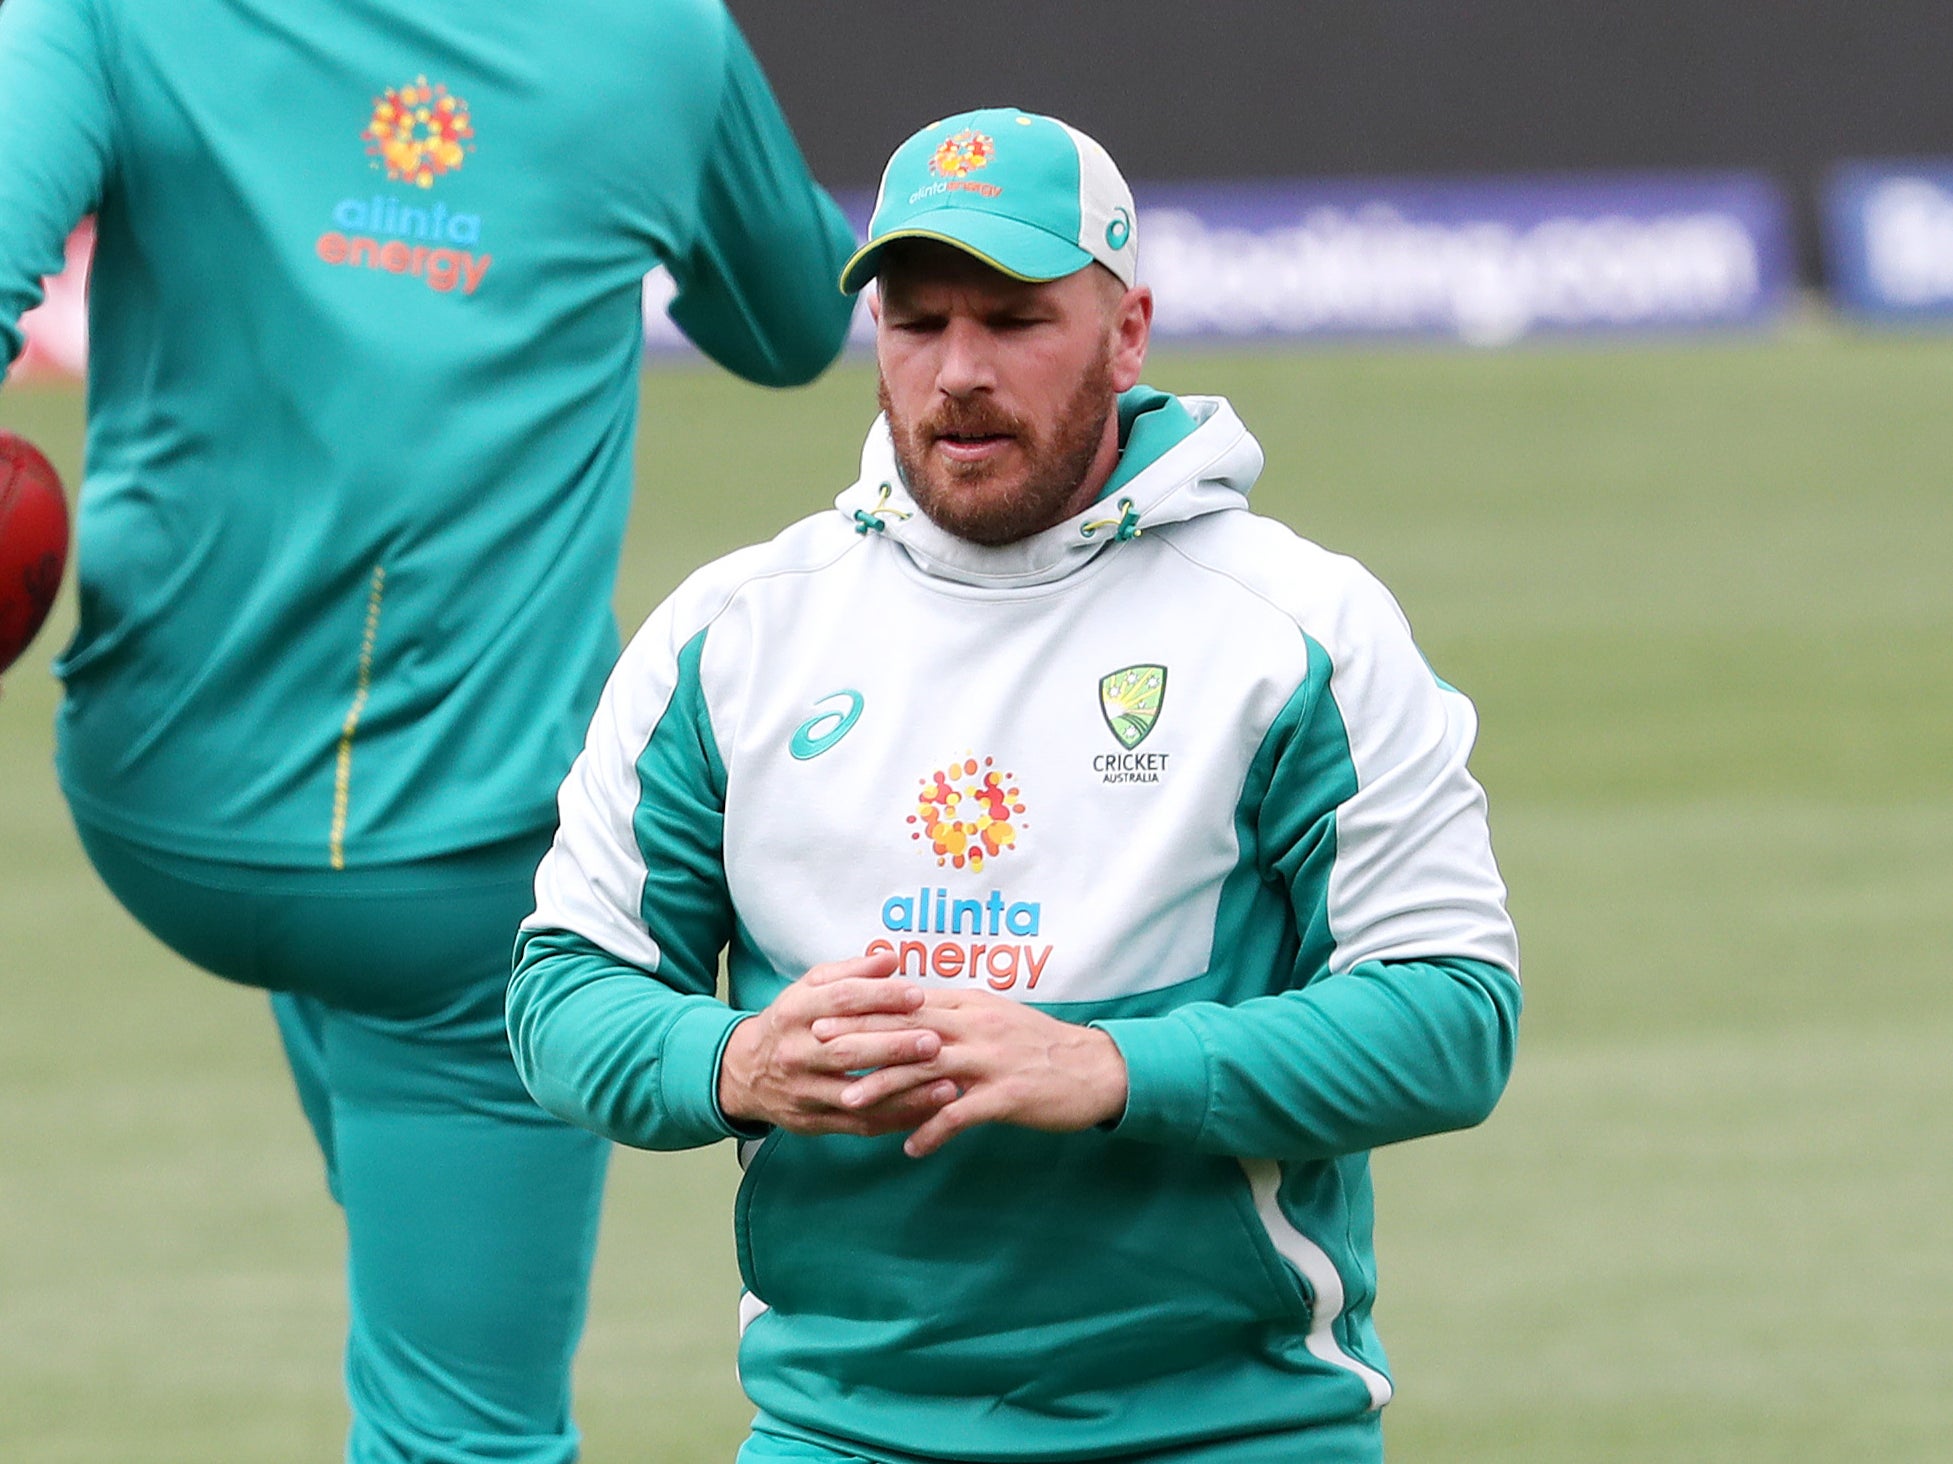 Finch recently relinquished the captaincy of Australia’s 50-over side